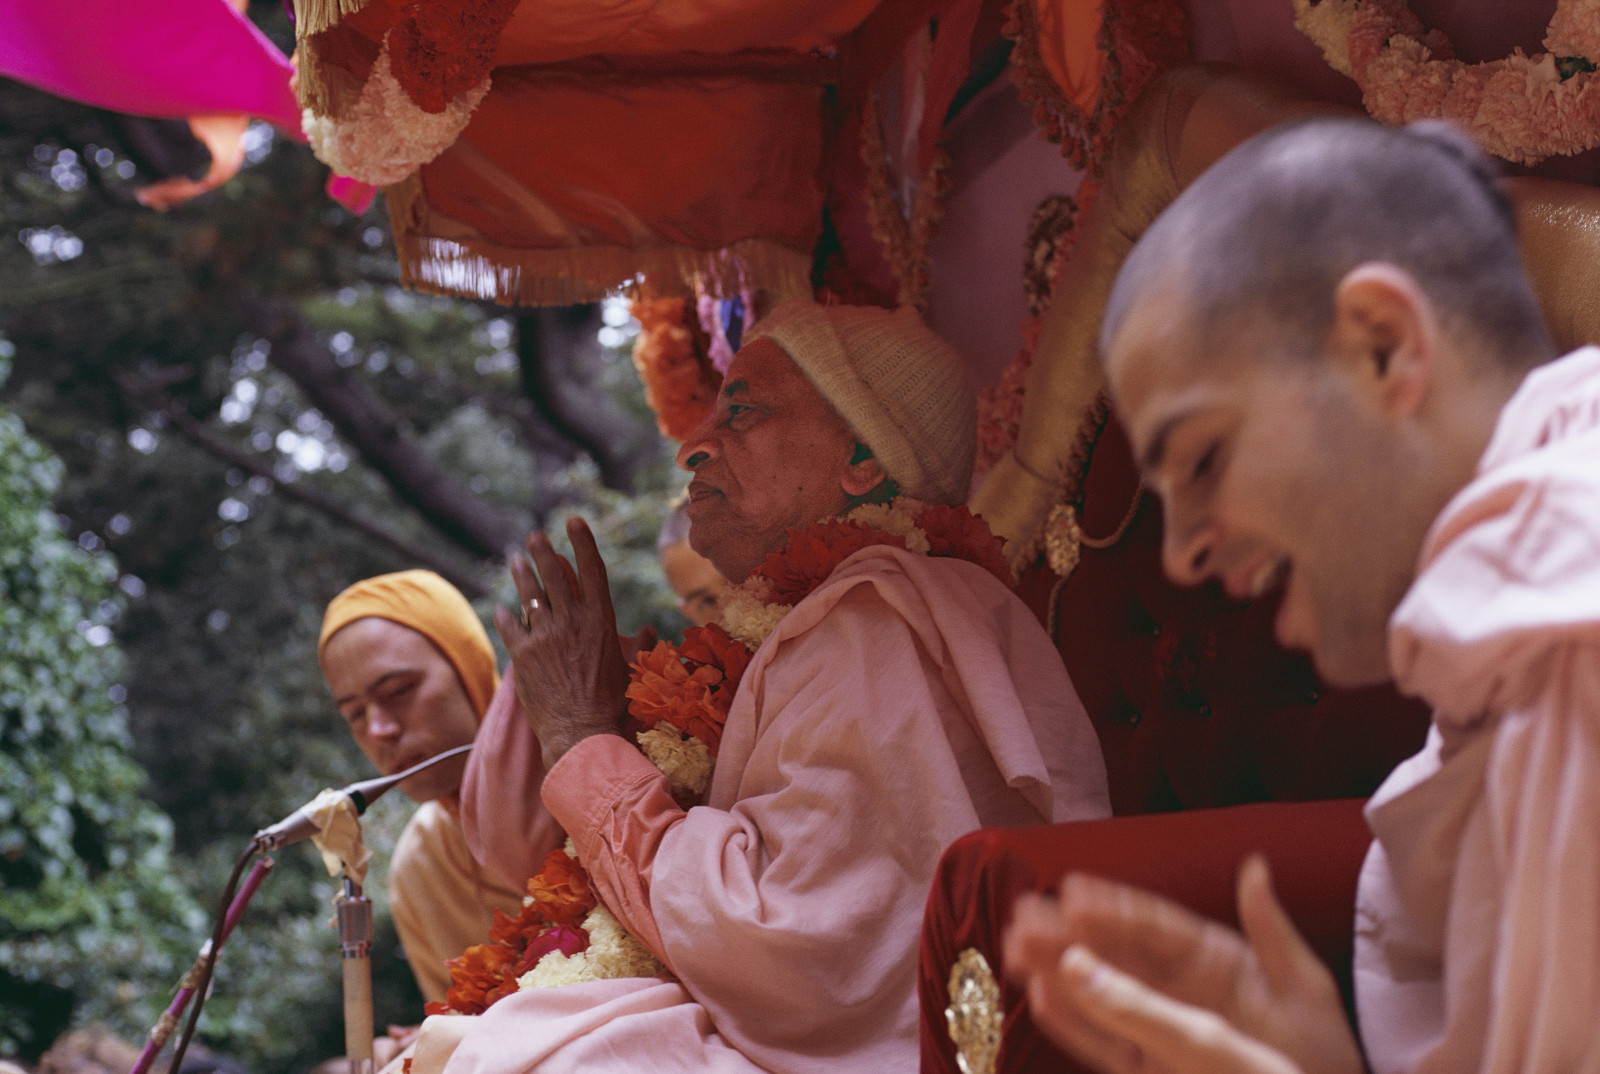 The Rise And Rise Of Hare Krishna Movement In Uk